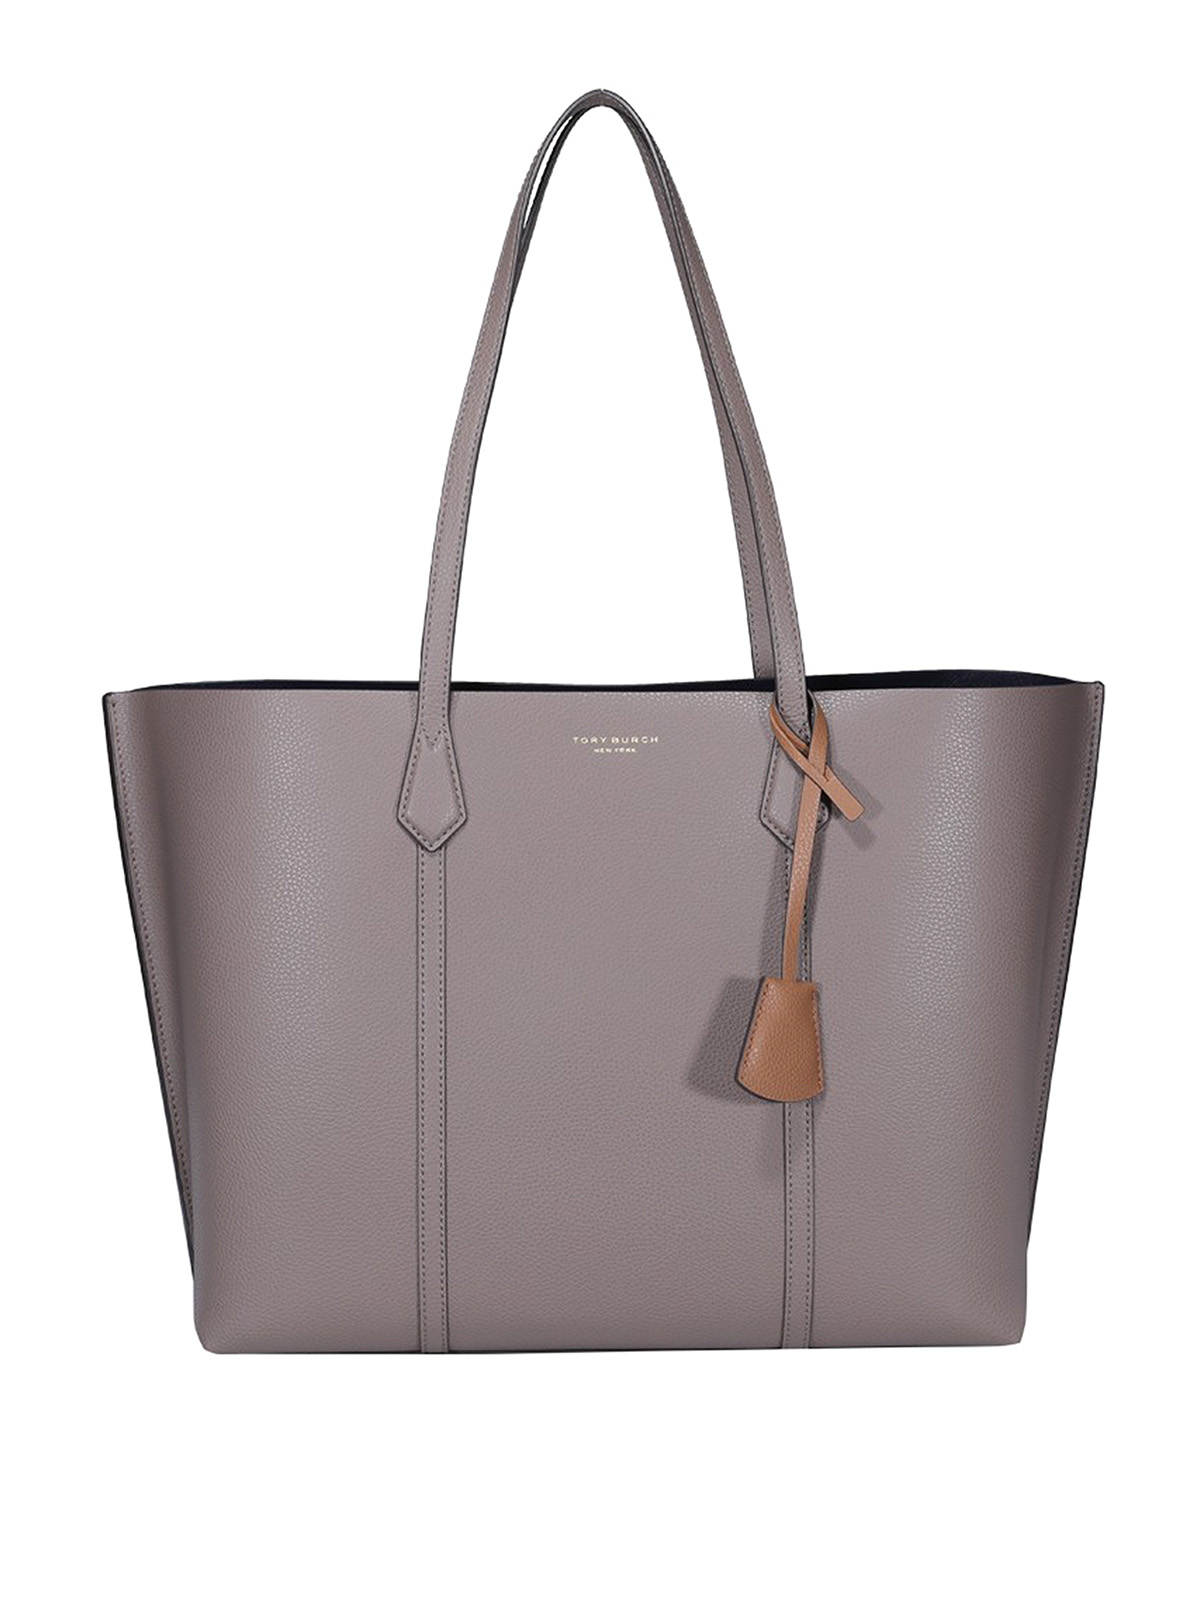 Tory Burch Grainy Tote In Grey